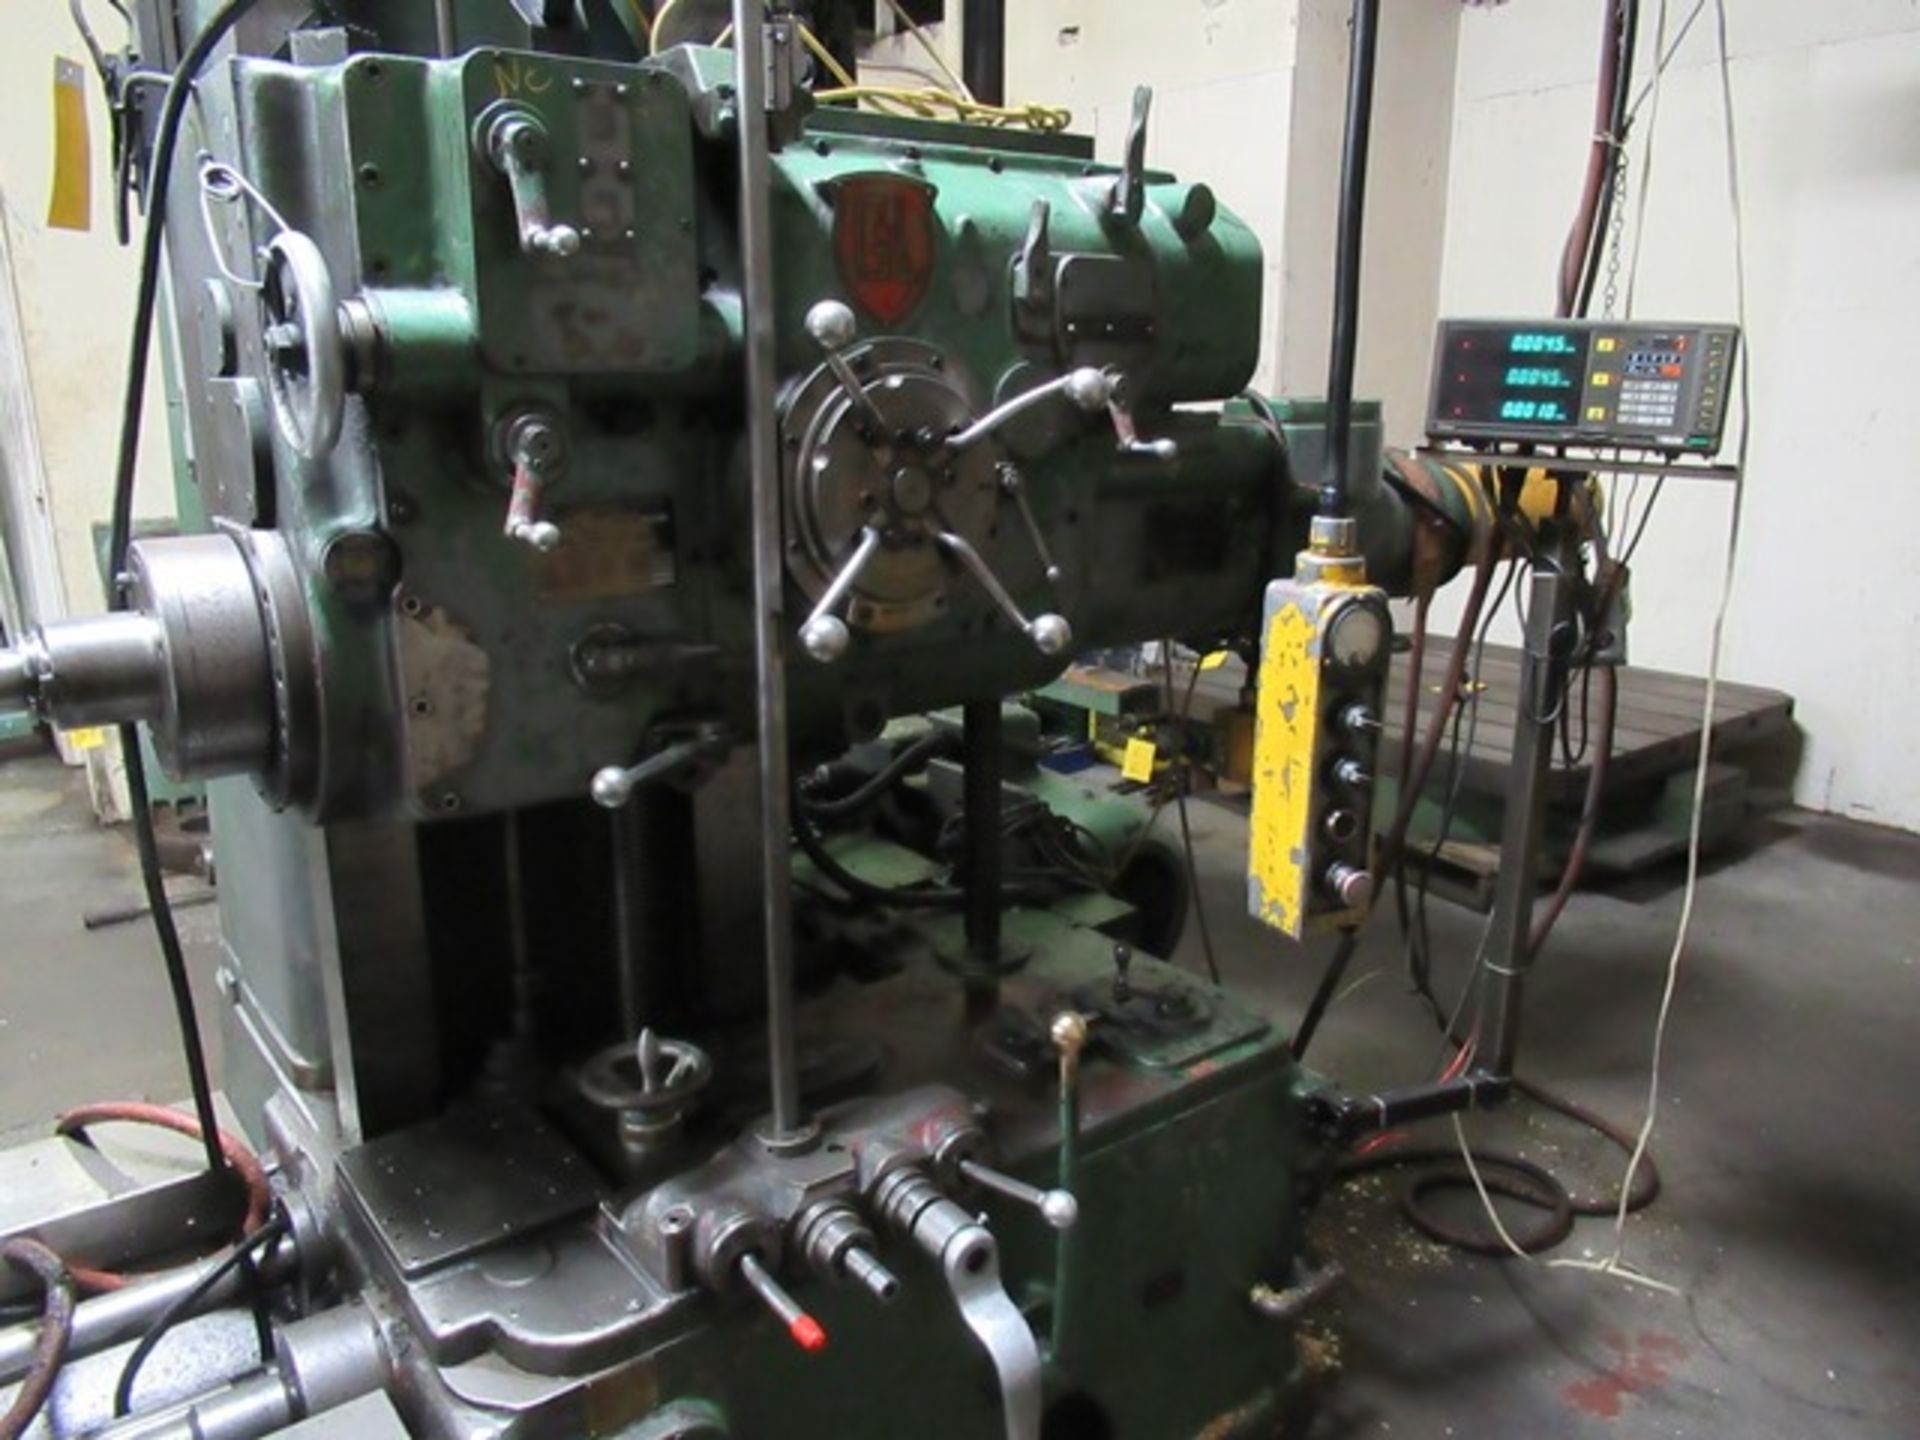 G&L 340T 60"X98" TABLE 4" SPINDLE HORIZONTAL BORING MILL W/MITUTOYO 3-AXIS DRO, #40 ADAPTER S/N: - Image 2 of 4